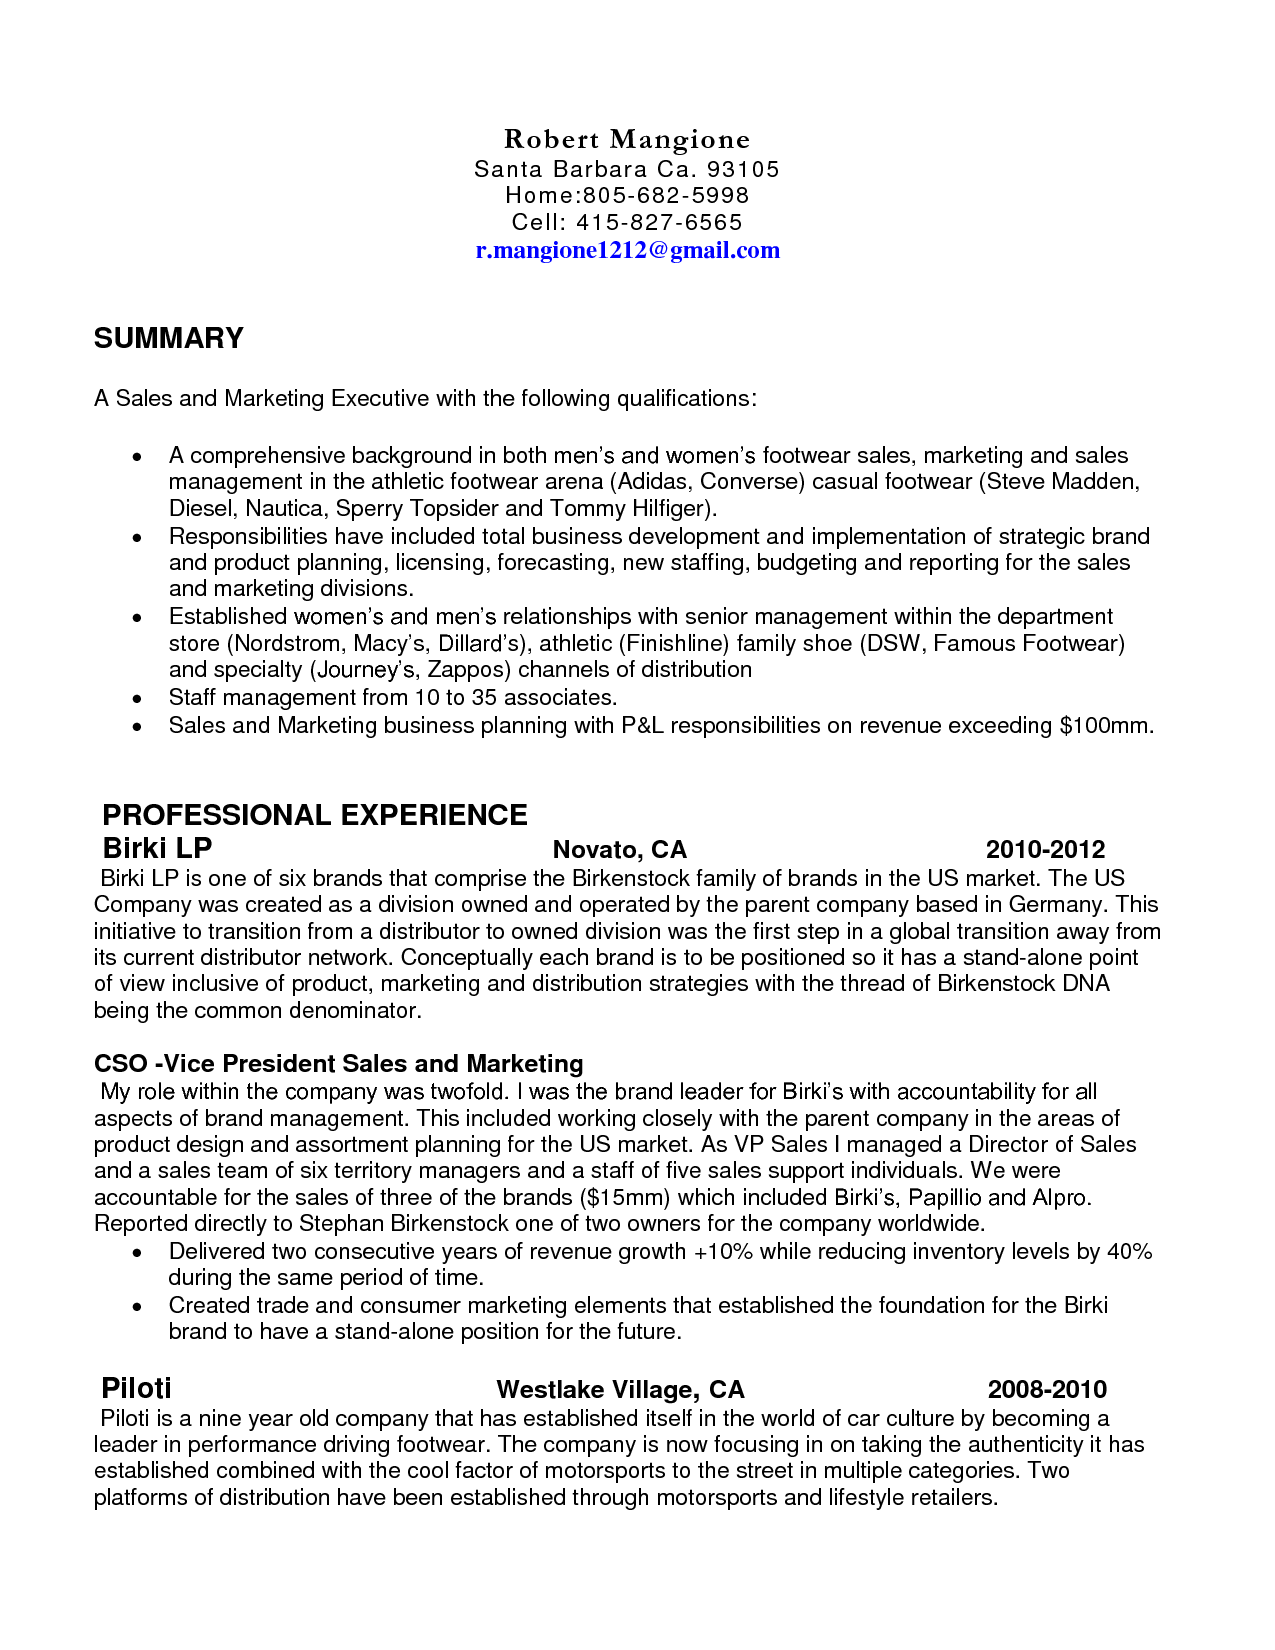 Resume Examples Nordstrom 